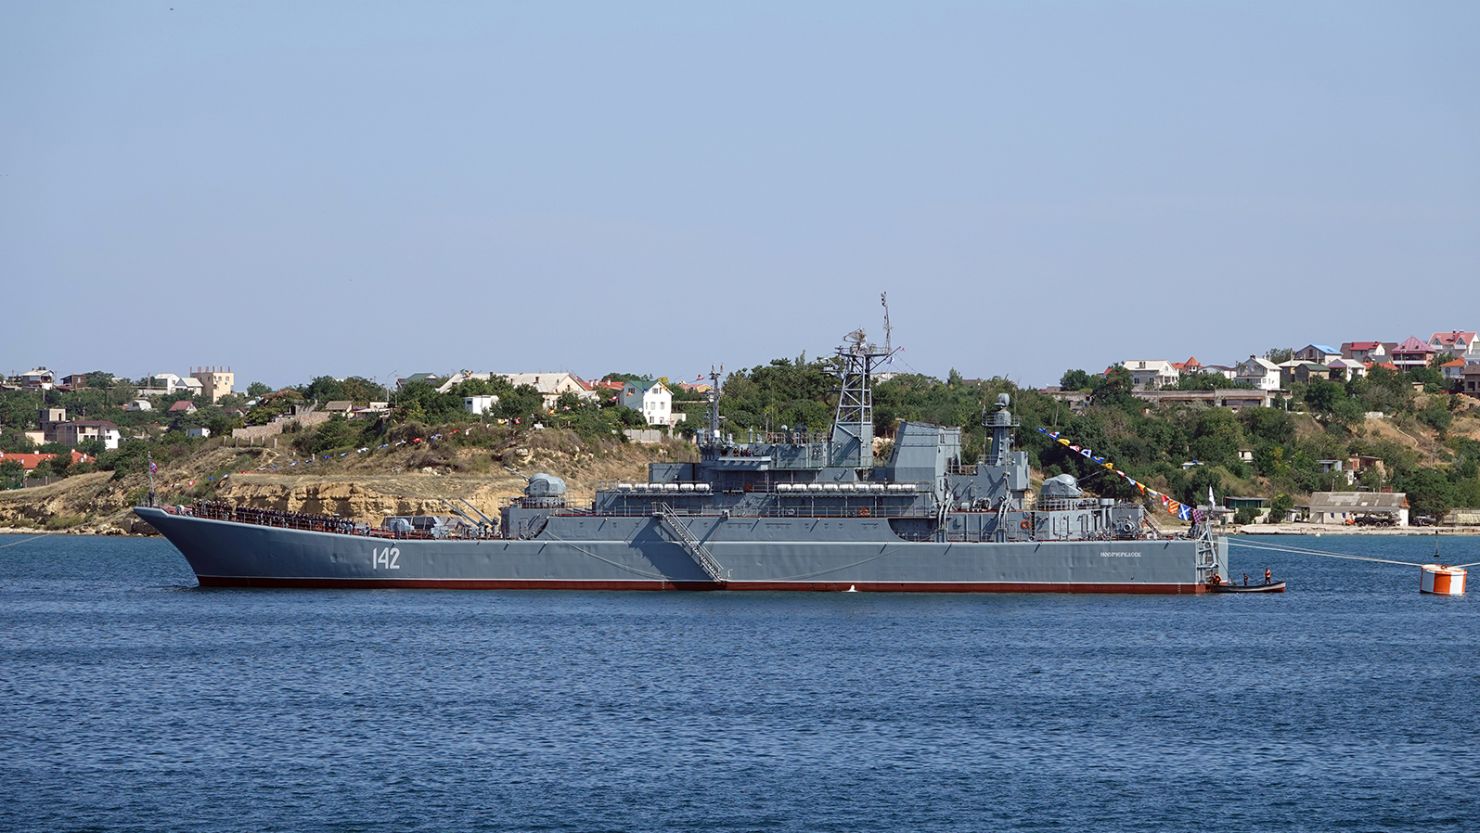 The Russian warship "Novocherkassk" of the Russian Black Sea Fleet is located in front of the port city Sevastopol, Russia on July 27, 2019.